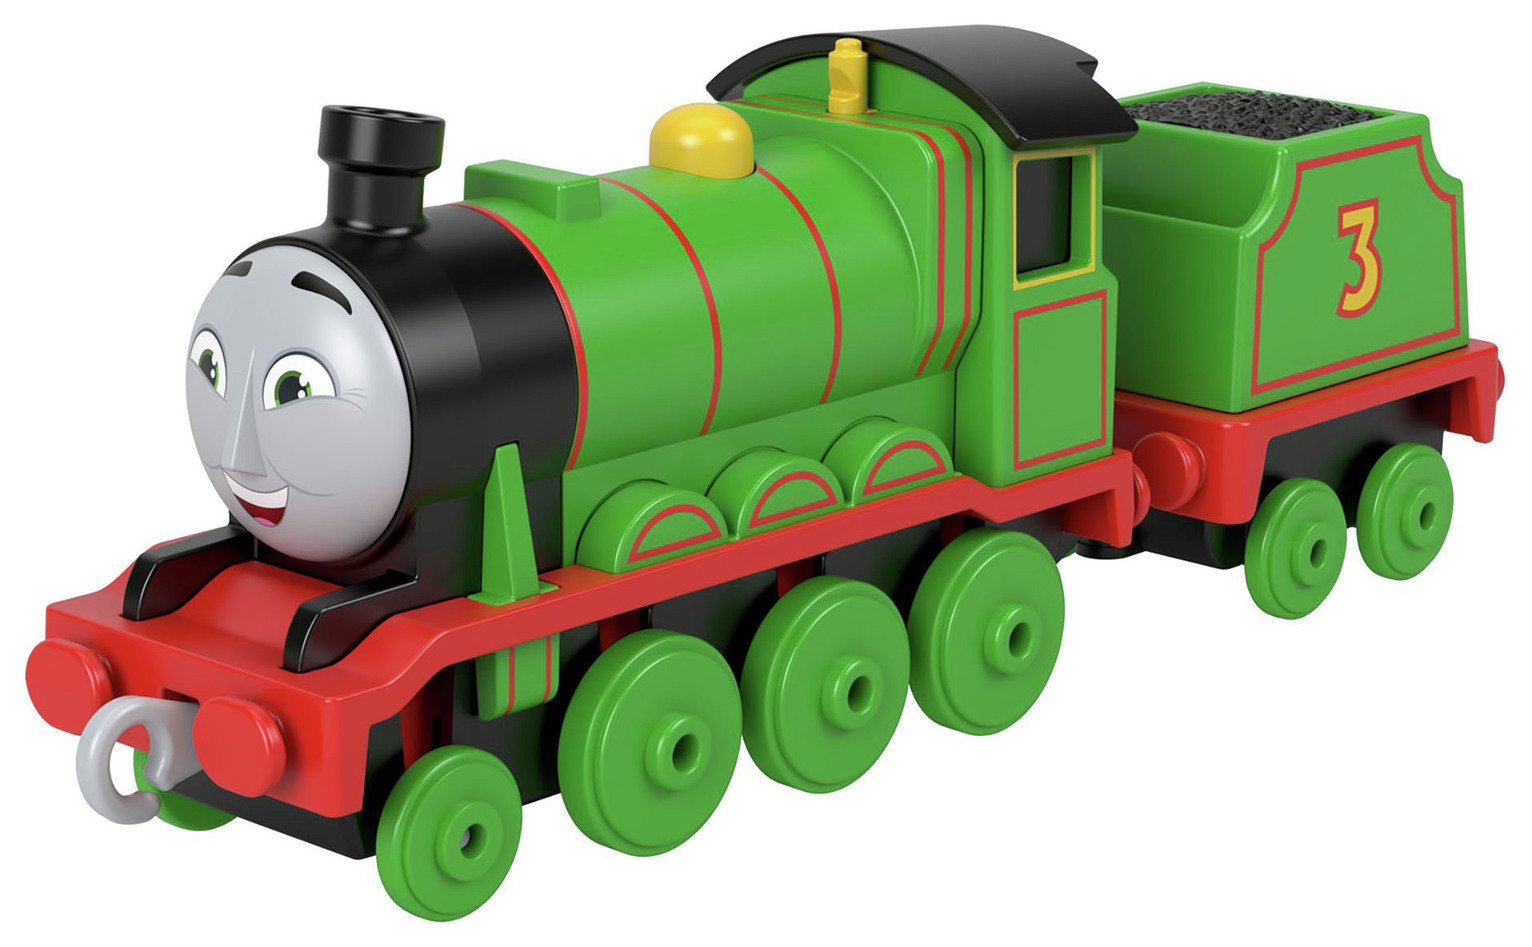 Thomas & Friends Henry Metal Toy Train Push-Along Engine review